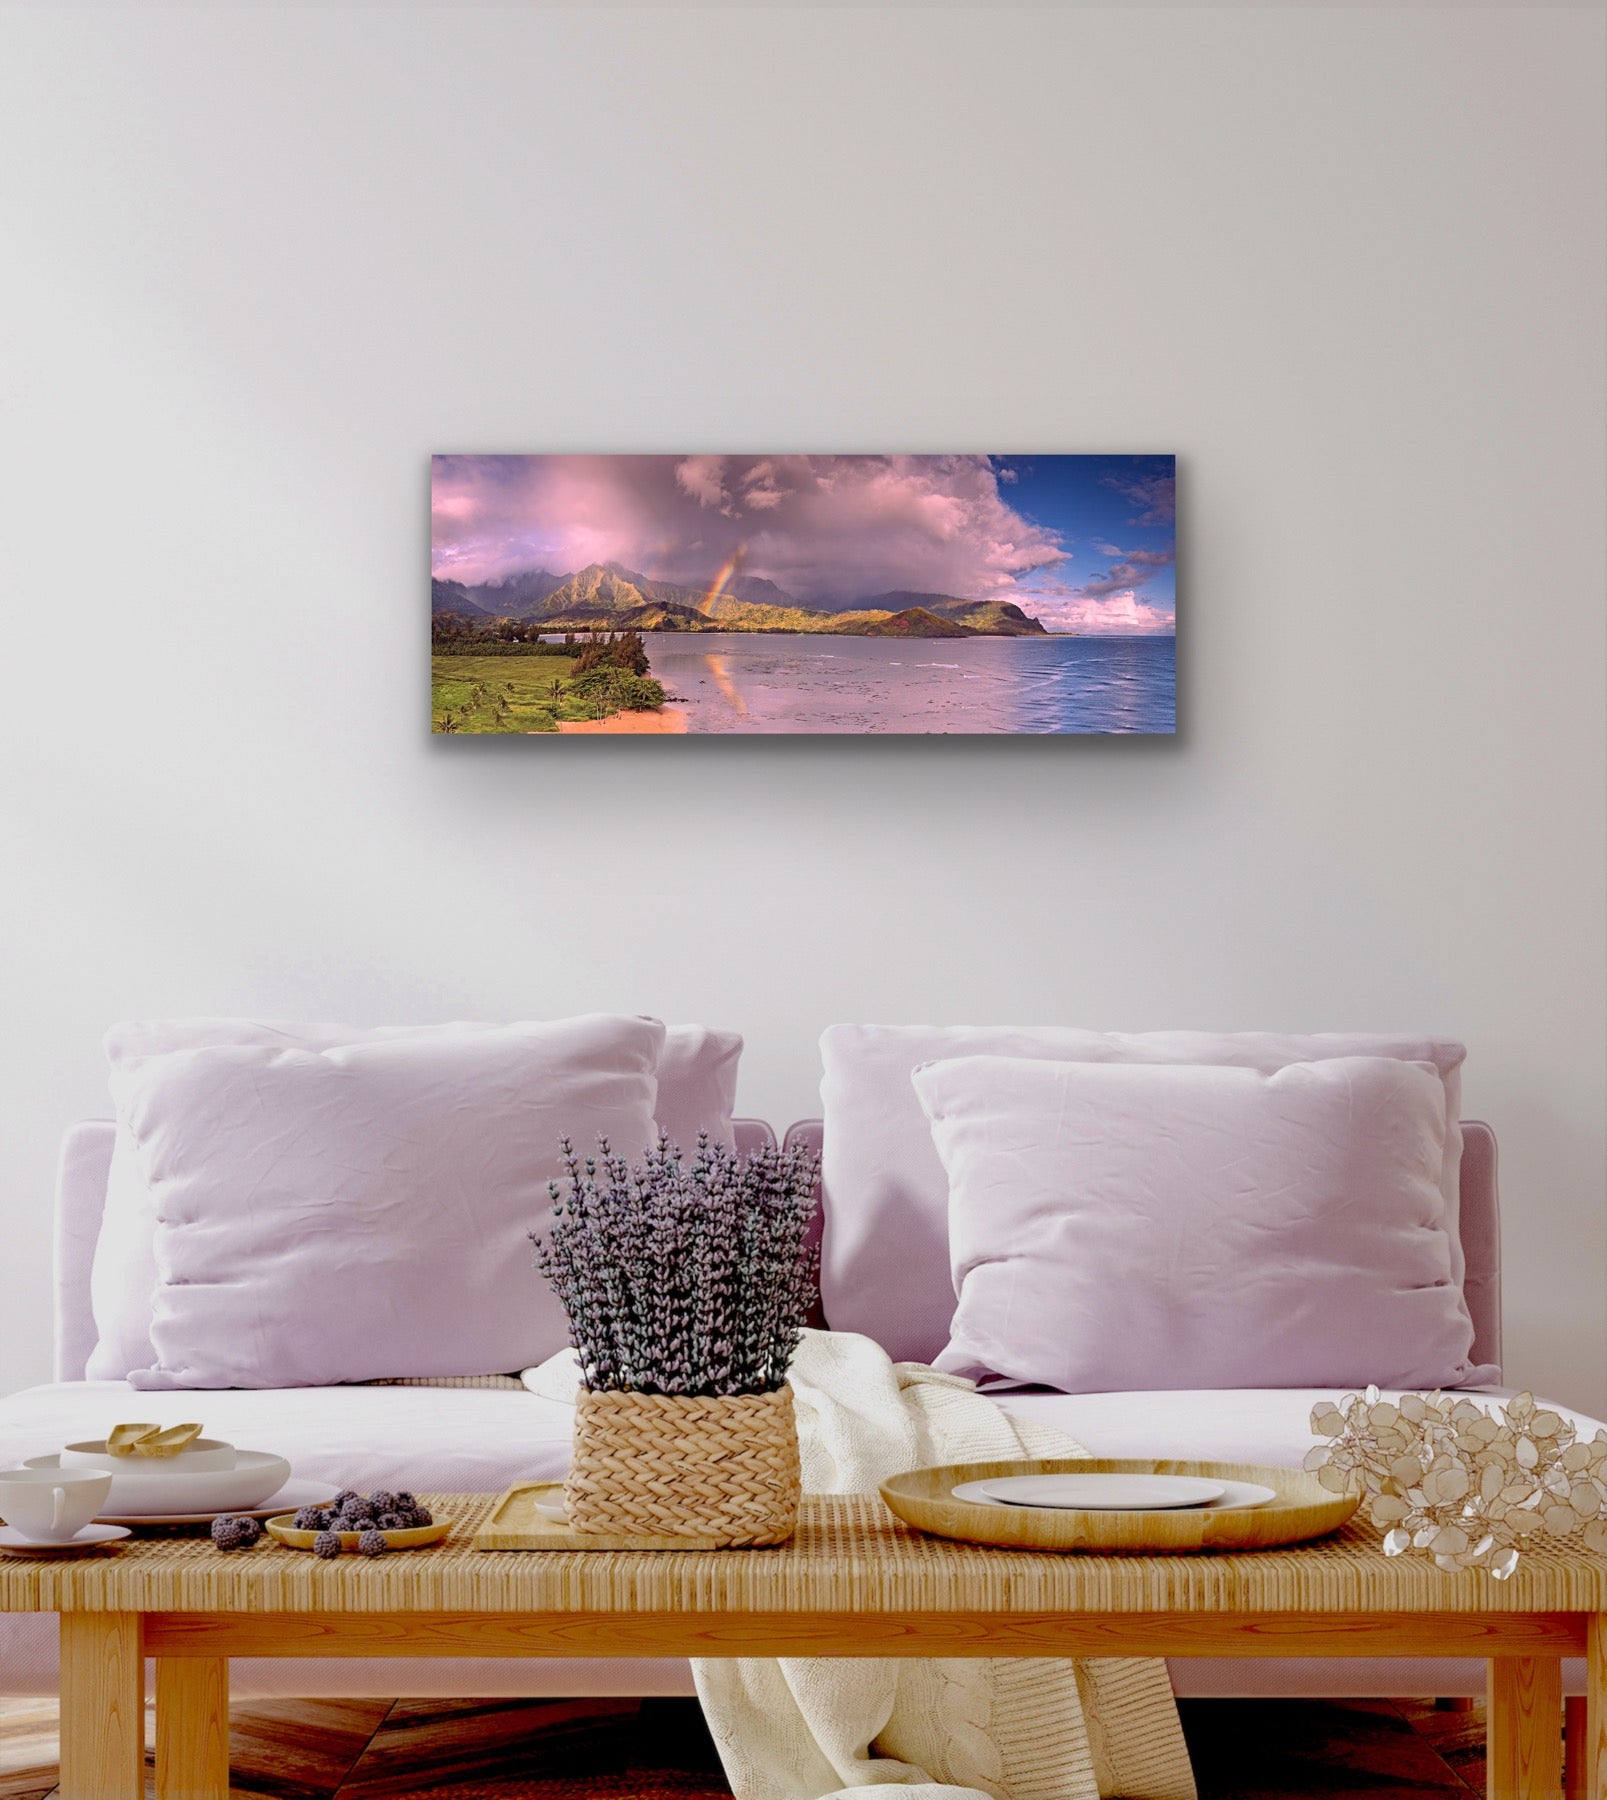 Wall demo of Hanalei Bay Rainbow, fine art landscape image by Inspiring Images Hawaii. 